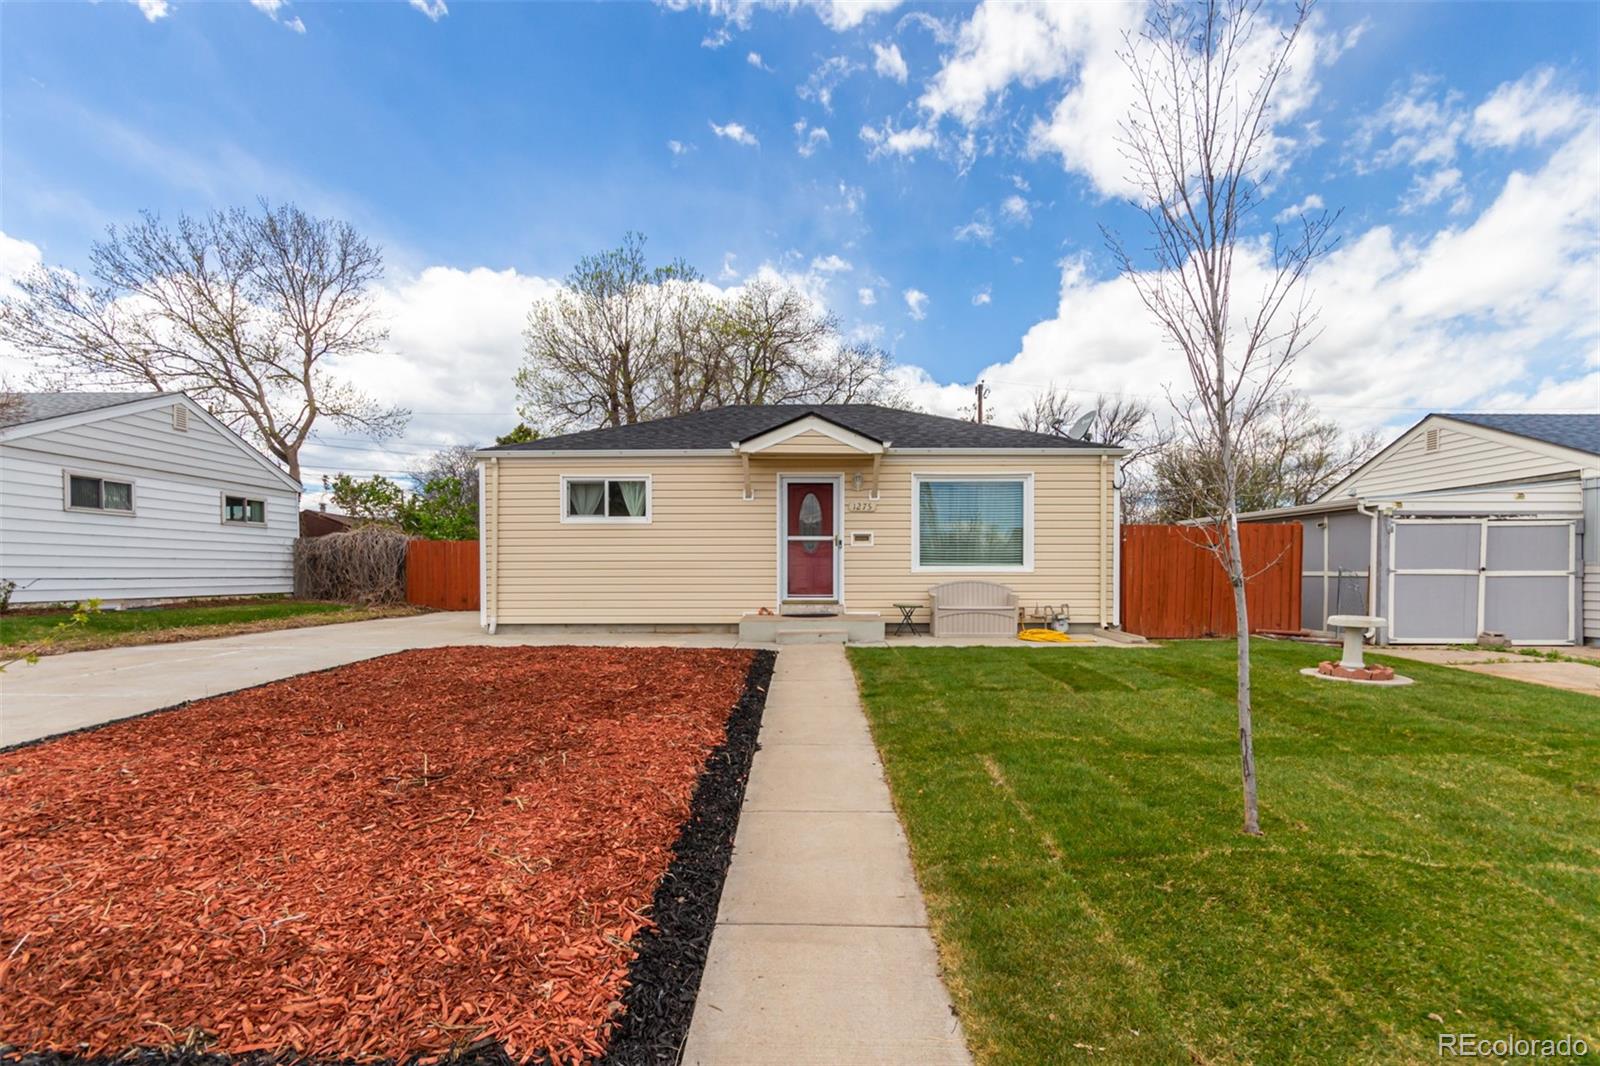 1275 s beach court, denver sold home. Closed on 2024-05-23 for $500,000.